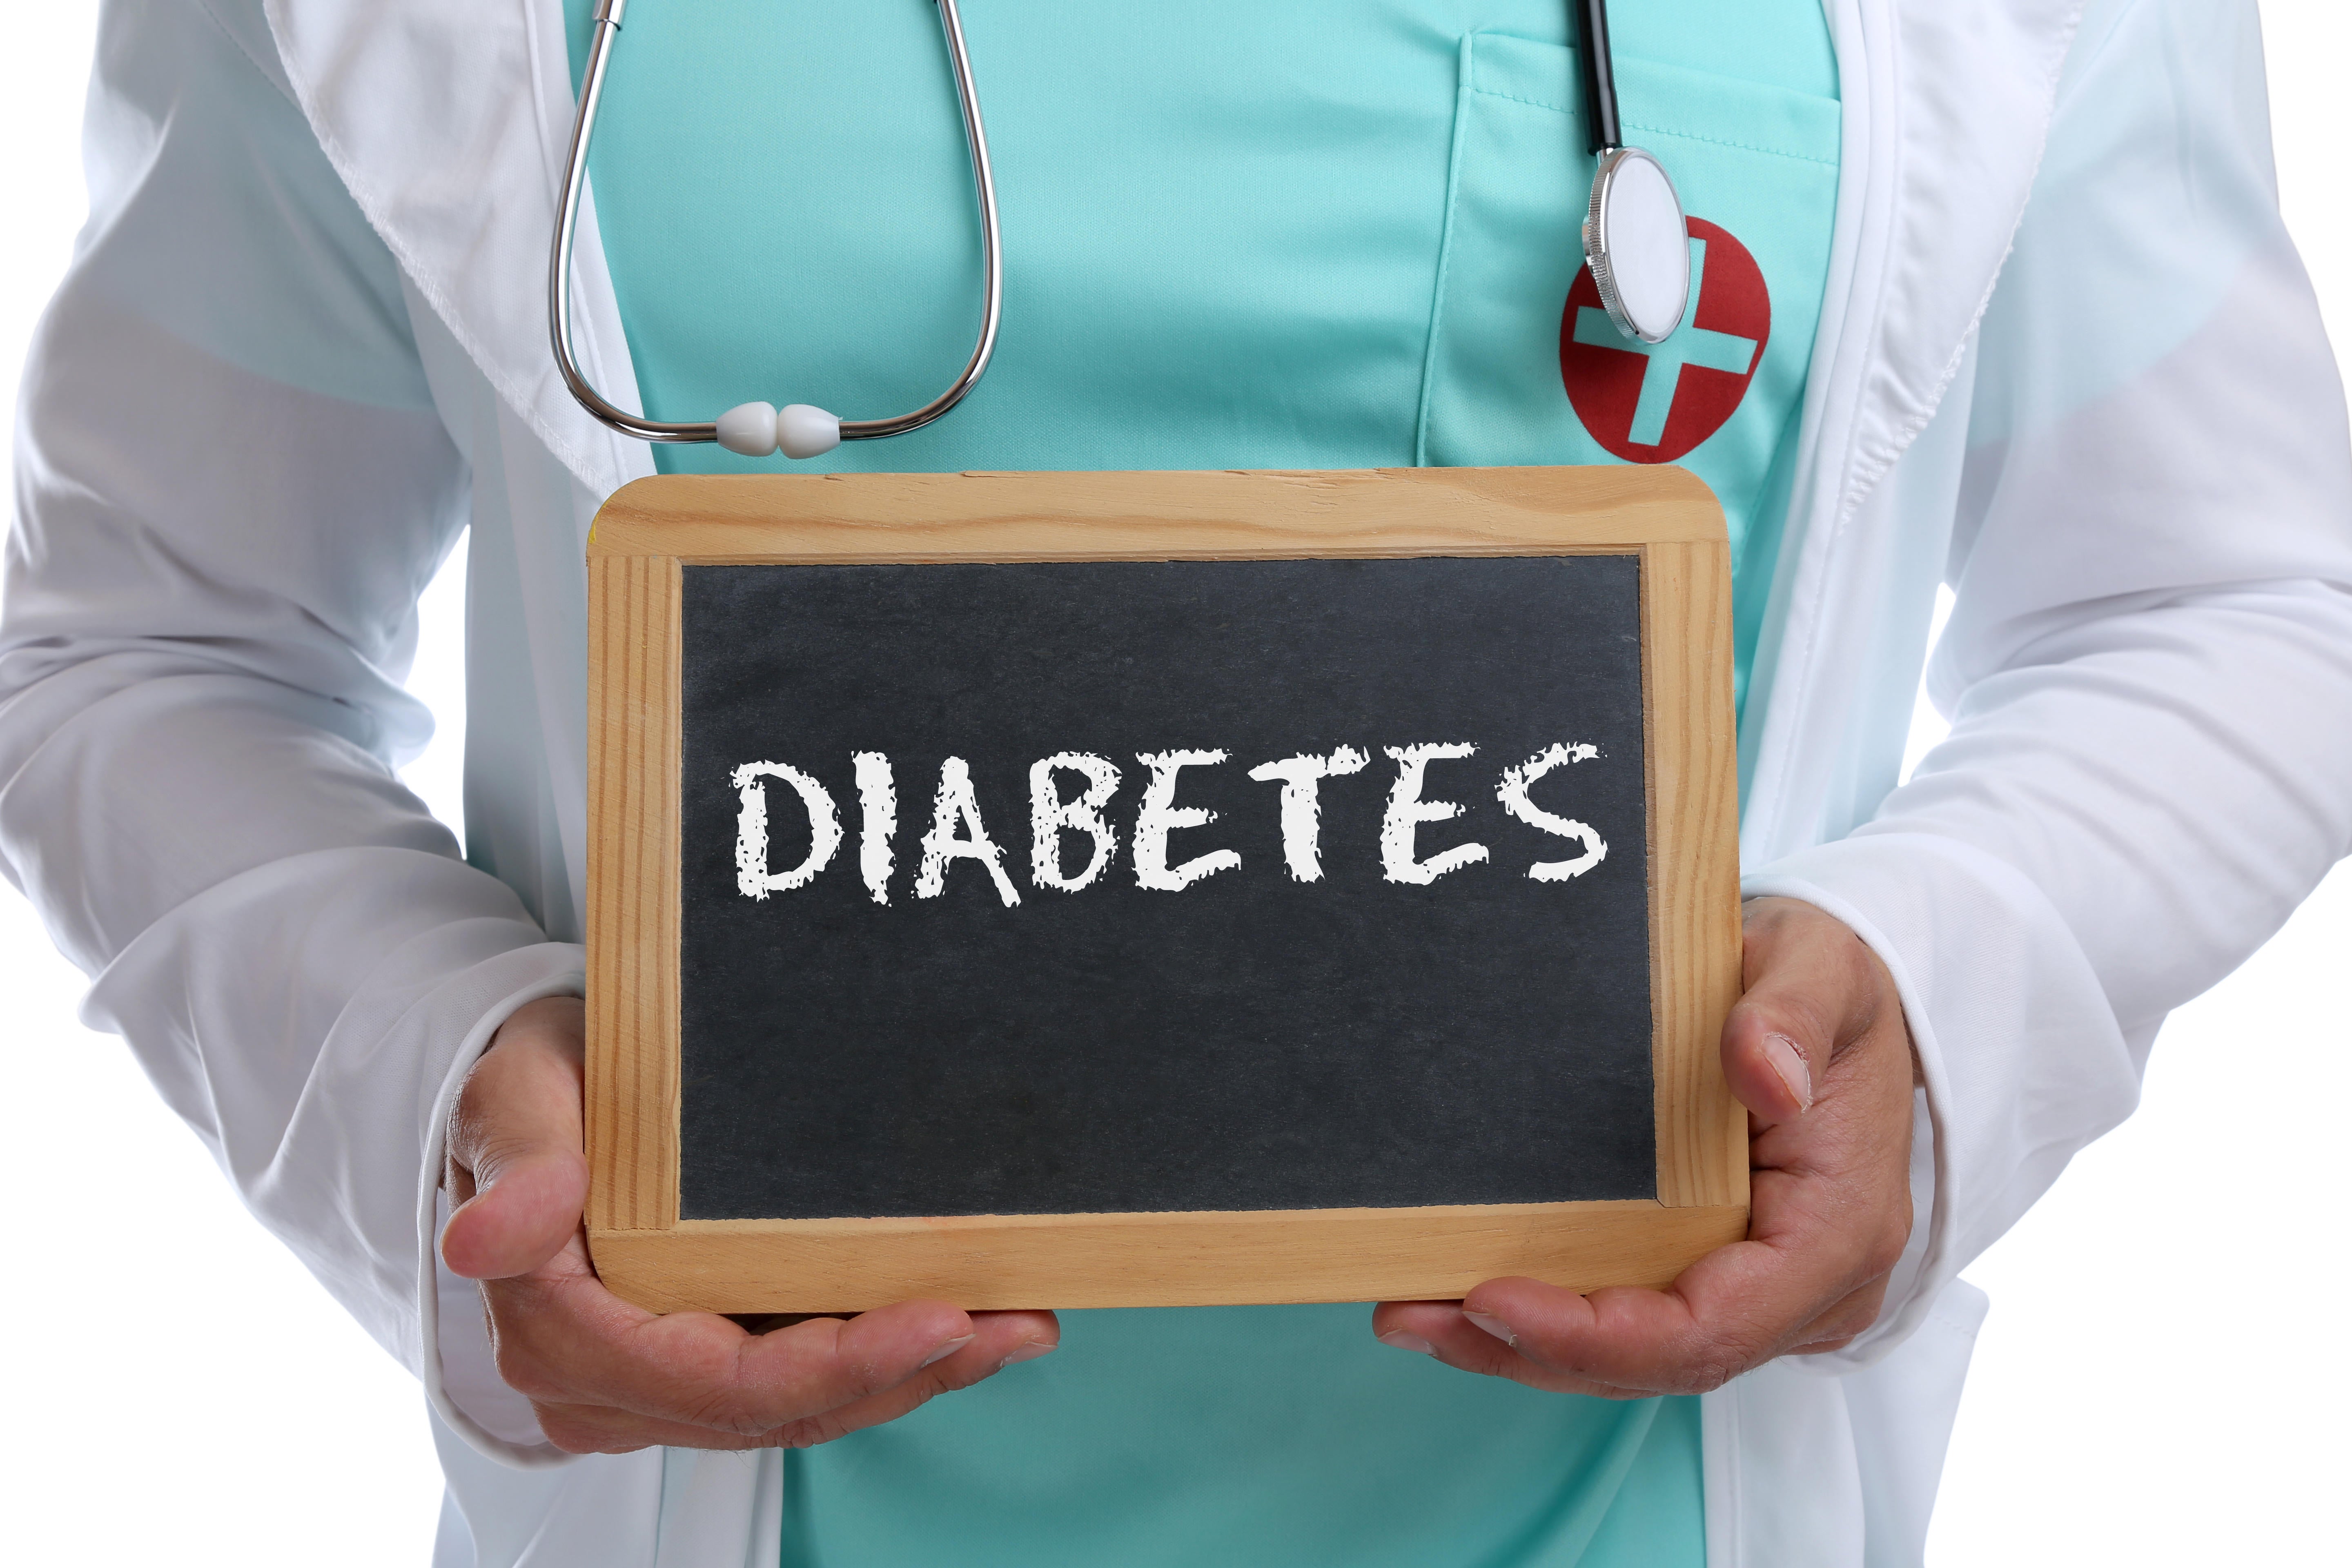 Doctor holding diabetes sign